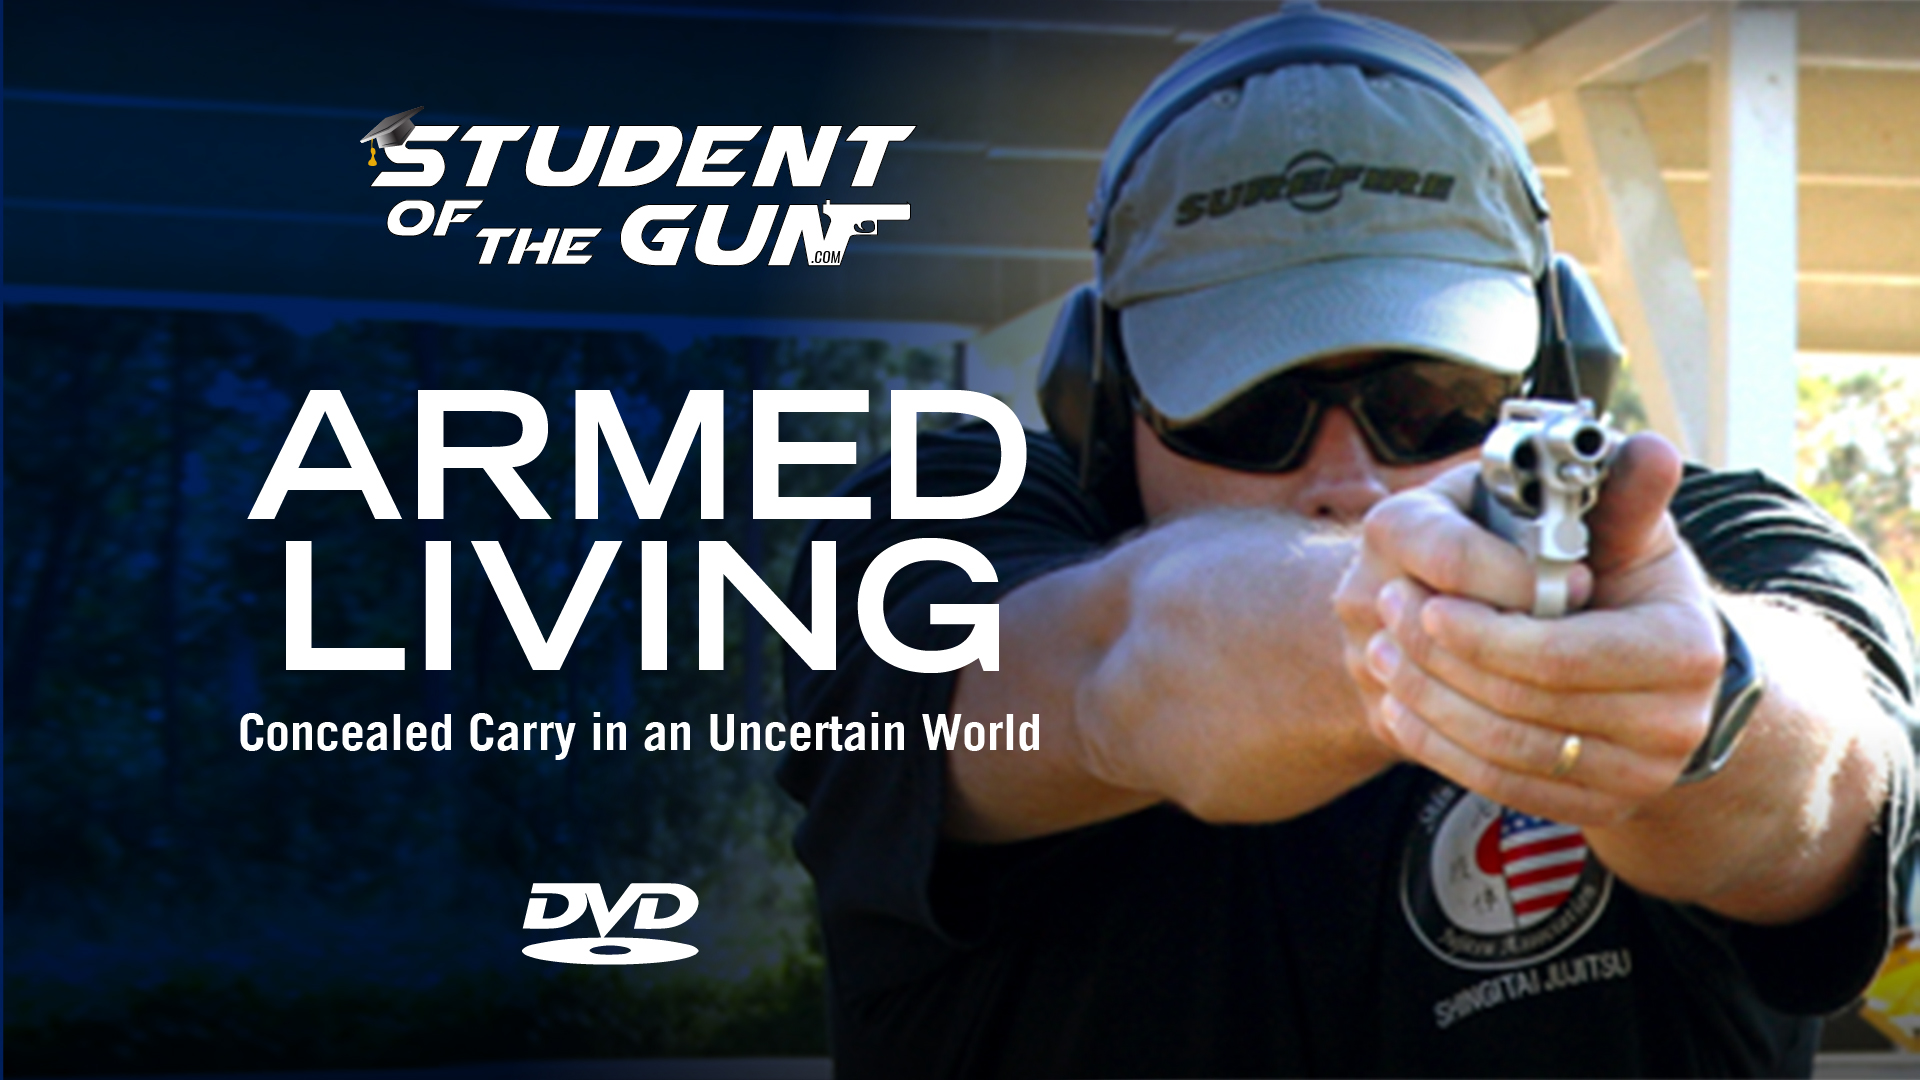 Armed Living: Concealed Carry in an Uncertain World DVD Download